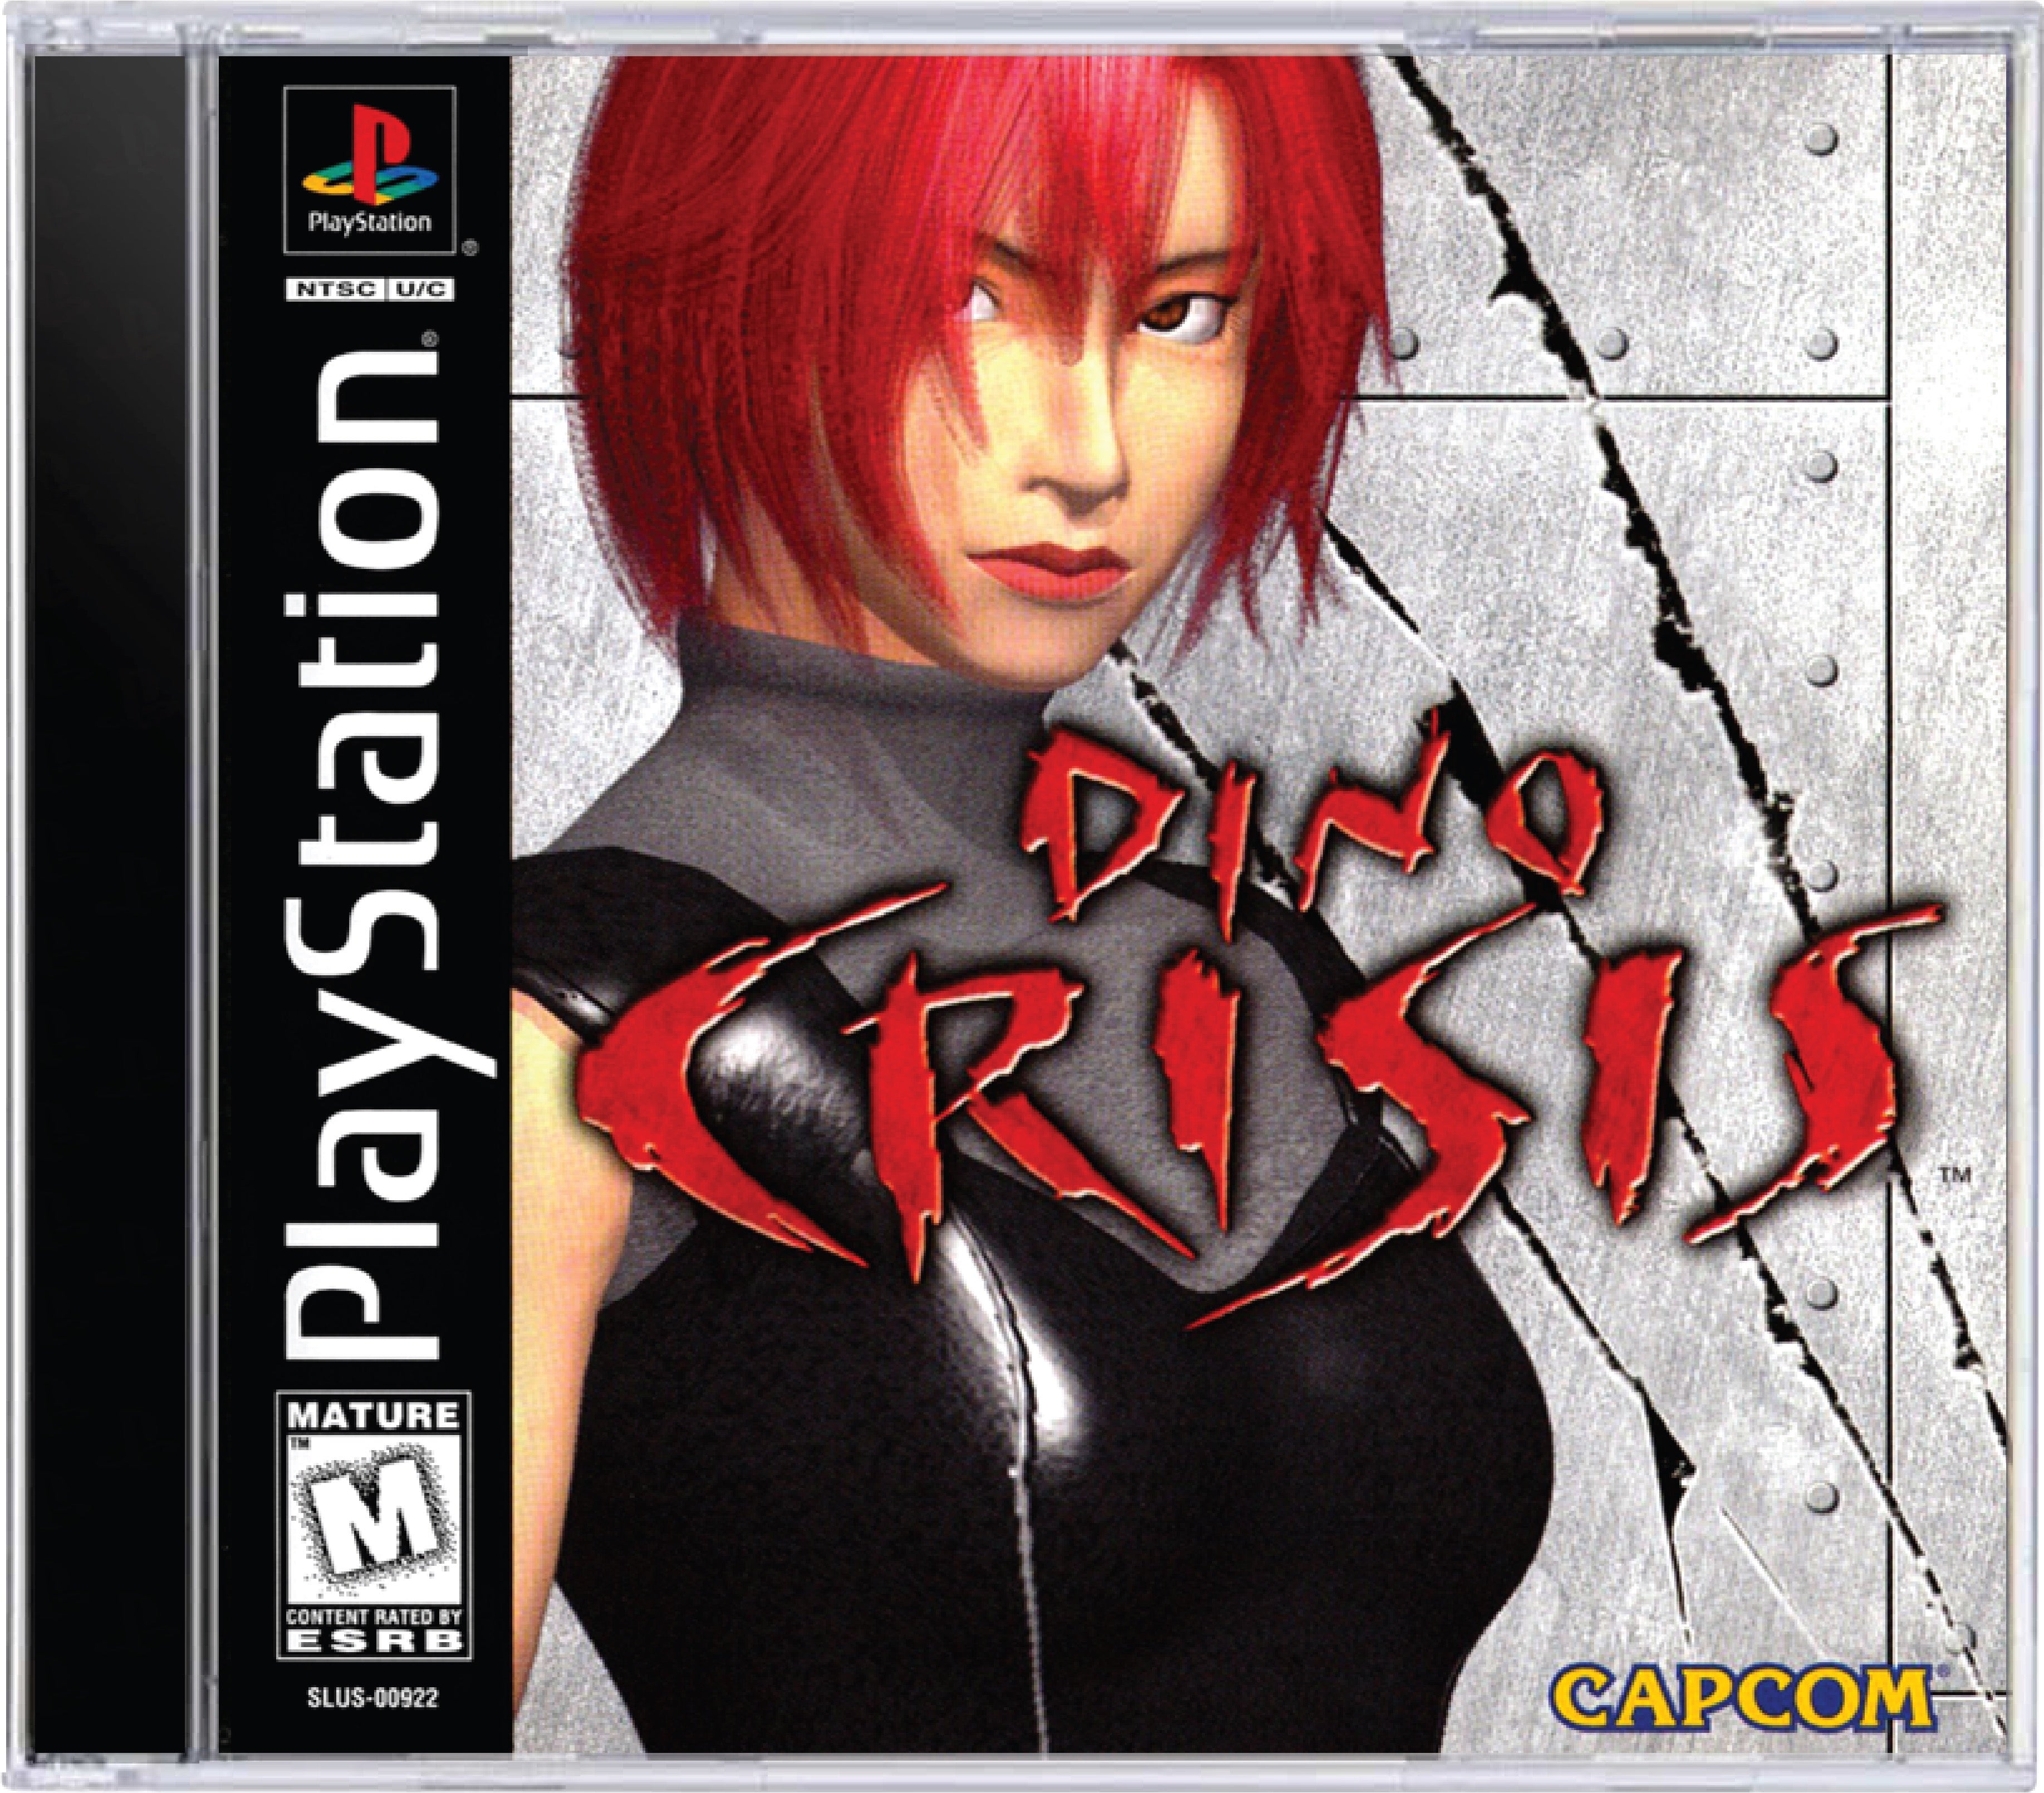 Dino Crisis Cover Art and Product Photo